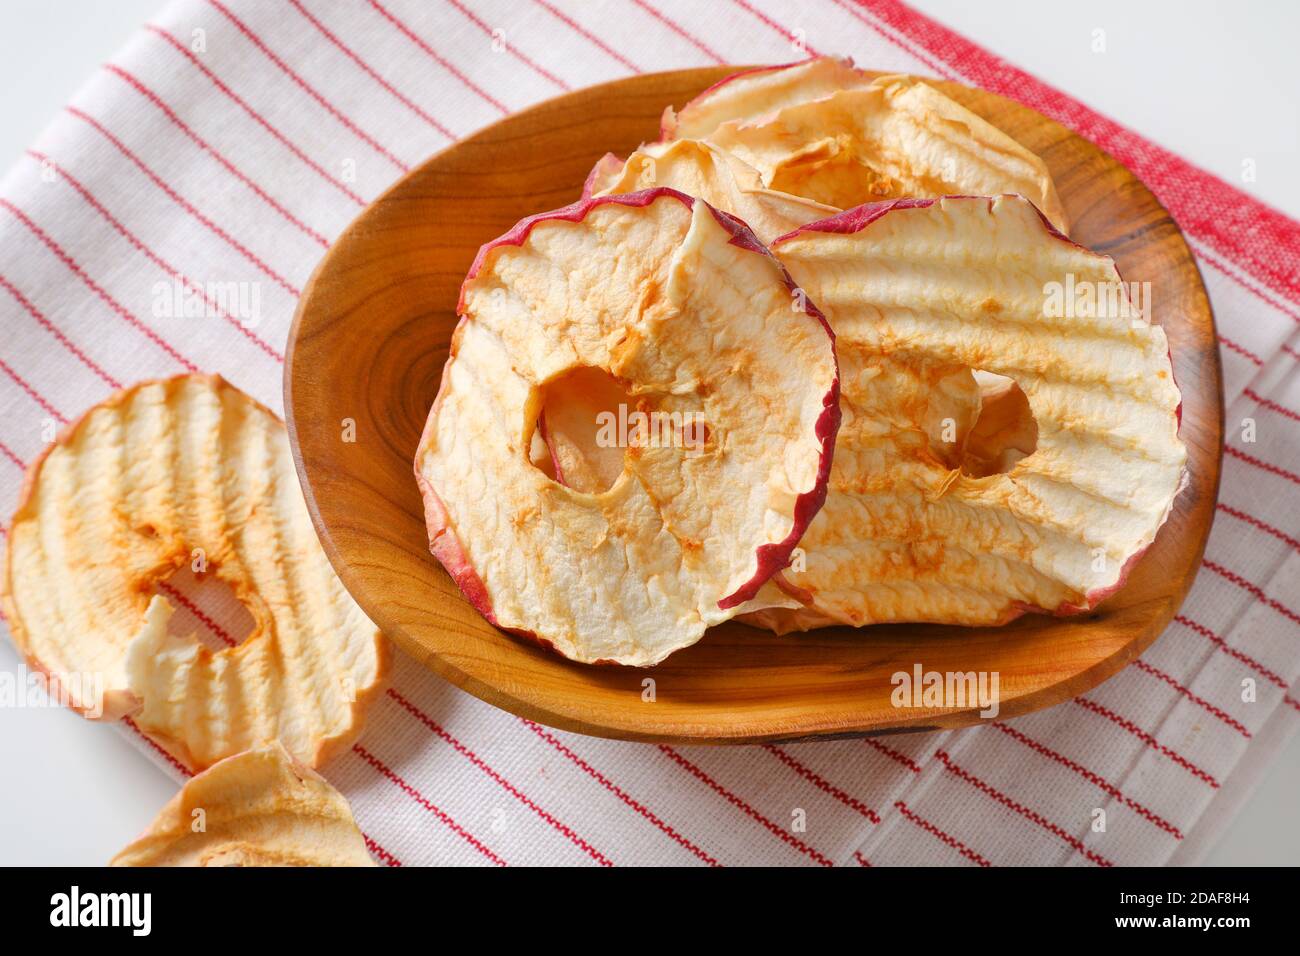 Bowl of dried apple slices - apple chips or rings - on striped tea towel Stock Photo